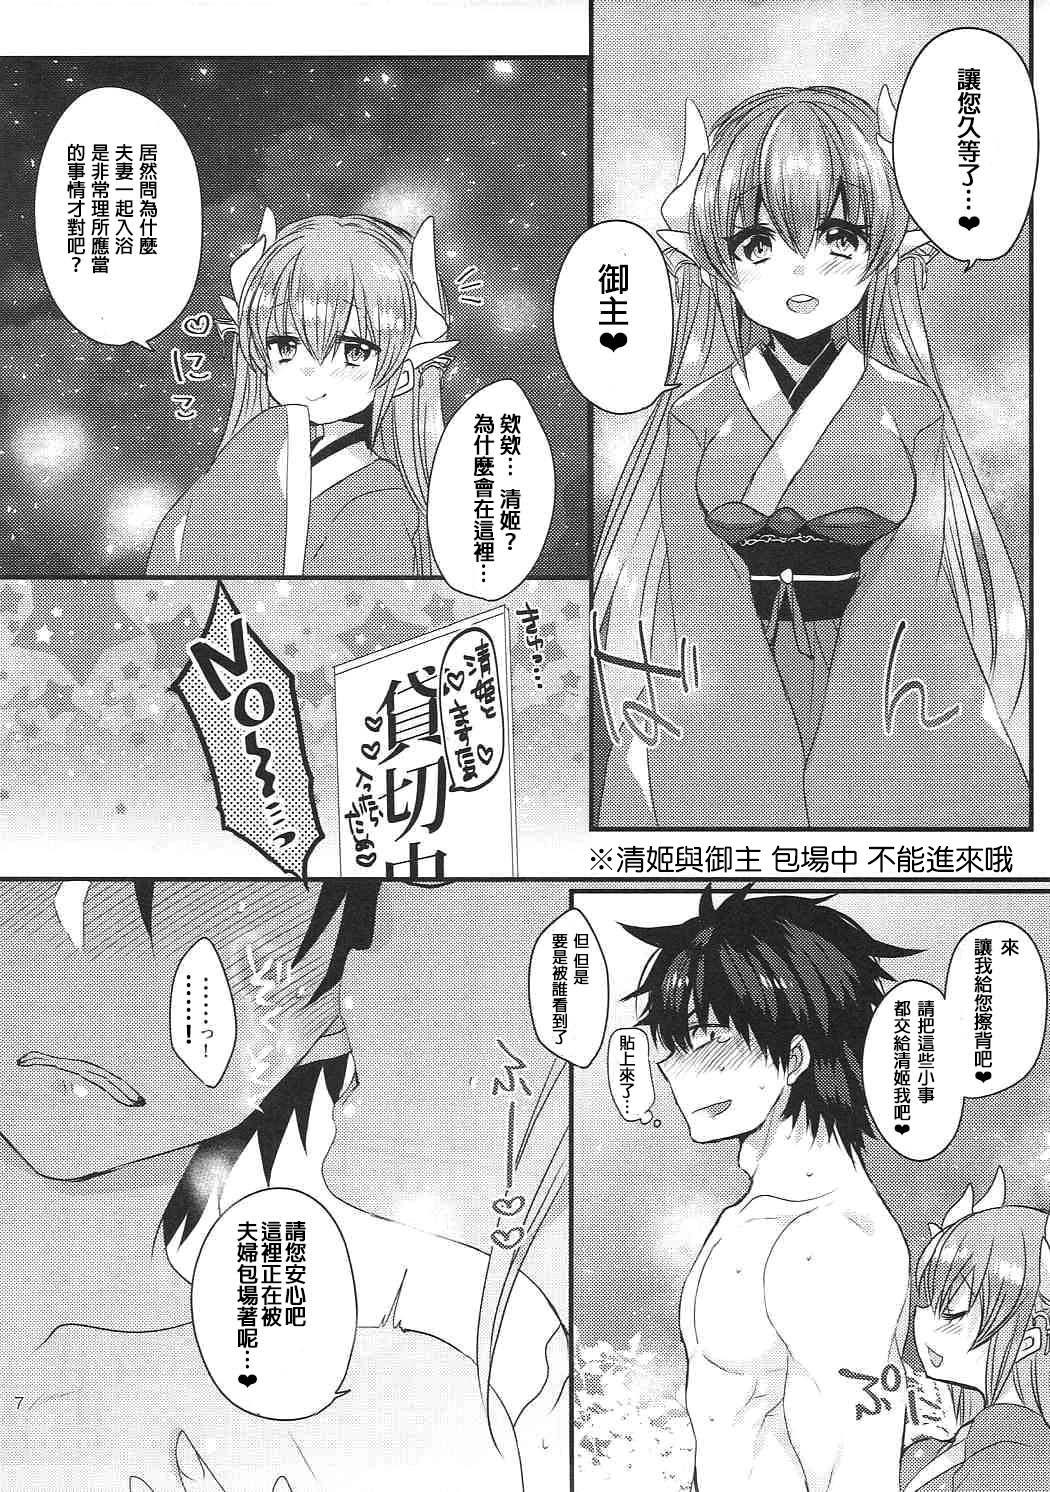 Rabo Kiyohime to Love Love Ofuro Time - Fate grand order Outdoor - Page 7